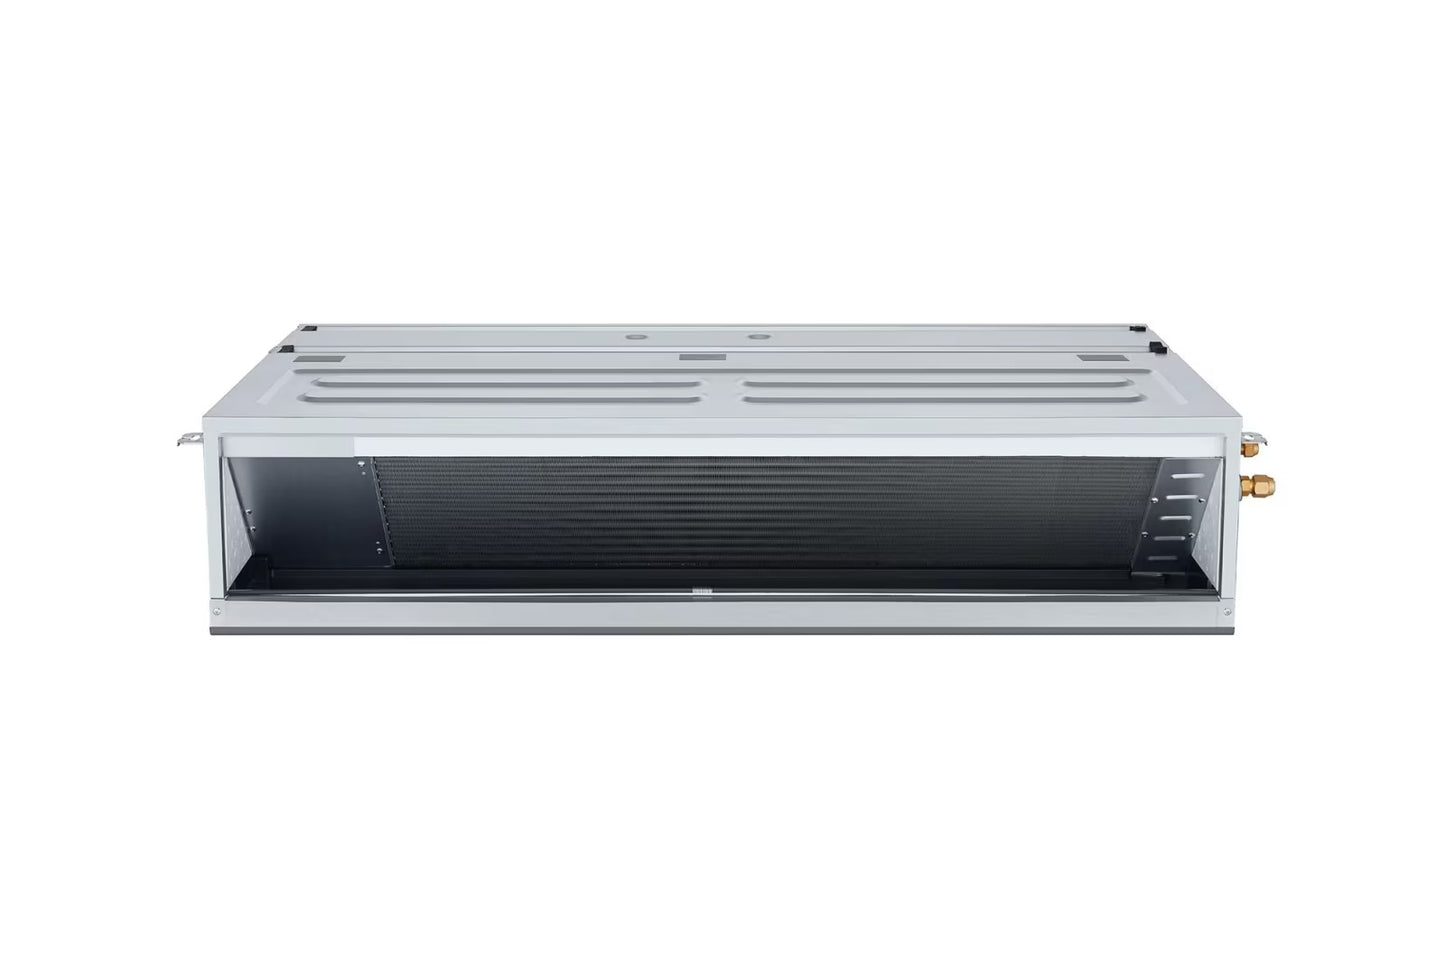 LG Ceiling Concealed Duct INV Unit 2.8KW with High Static and E.S.P. Control for Multiple Rooms - ARNU09GBHA4